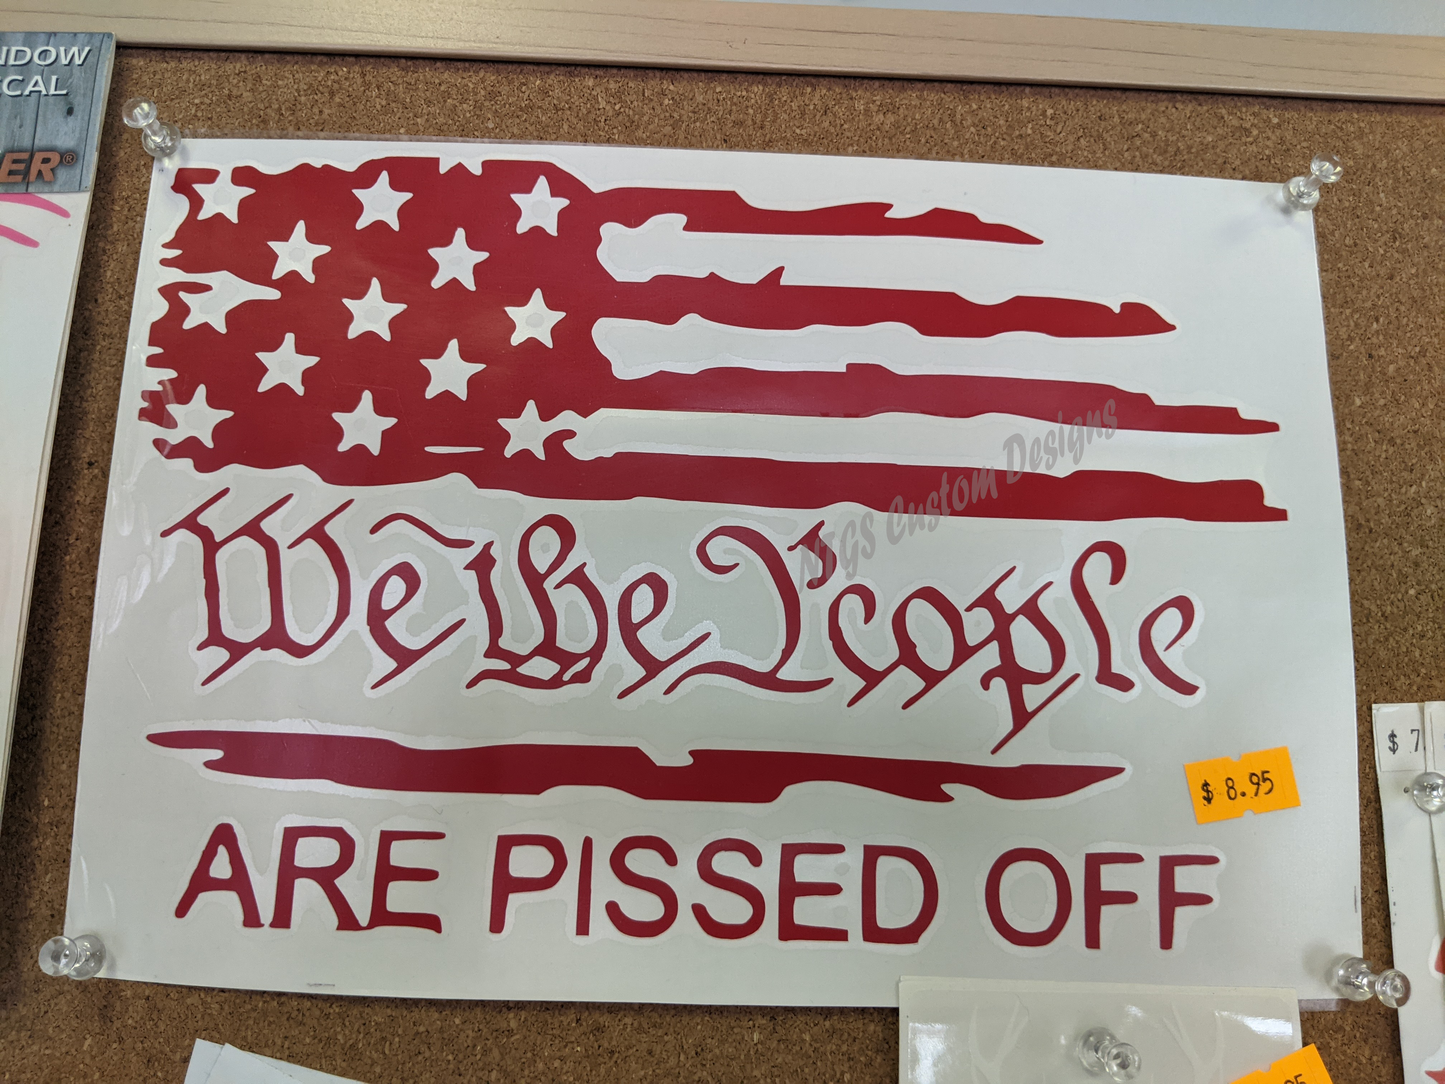 We the people are pissed off